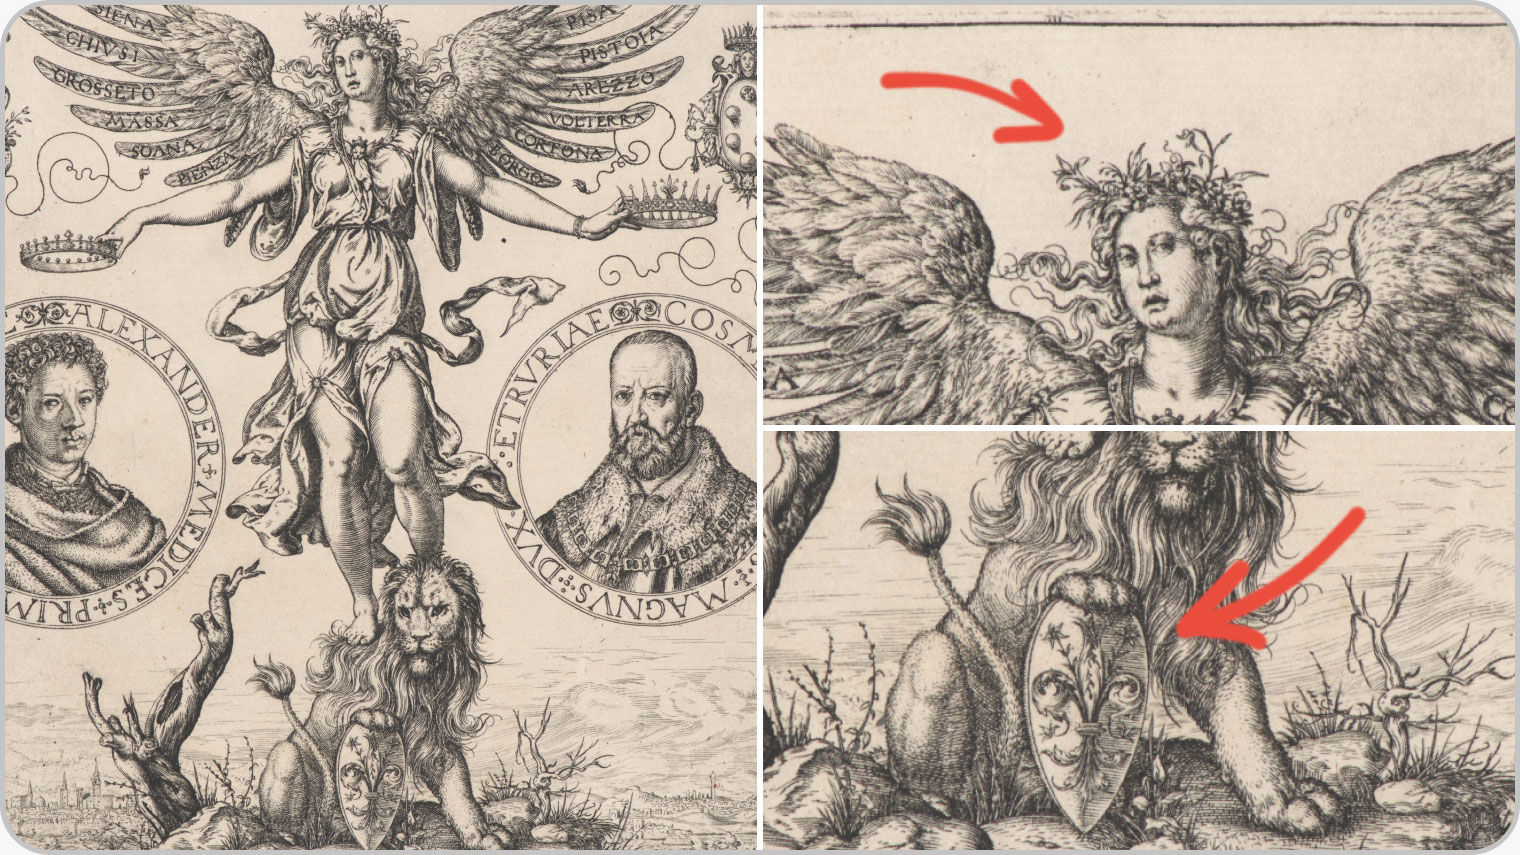 Detail of an engraving; red mark-ups that are not original to the artwork have been added digitally to point out details in the image such as the lilies in female figure’s hair as well as the lion’s shield